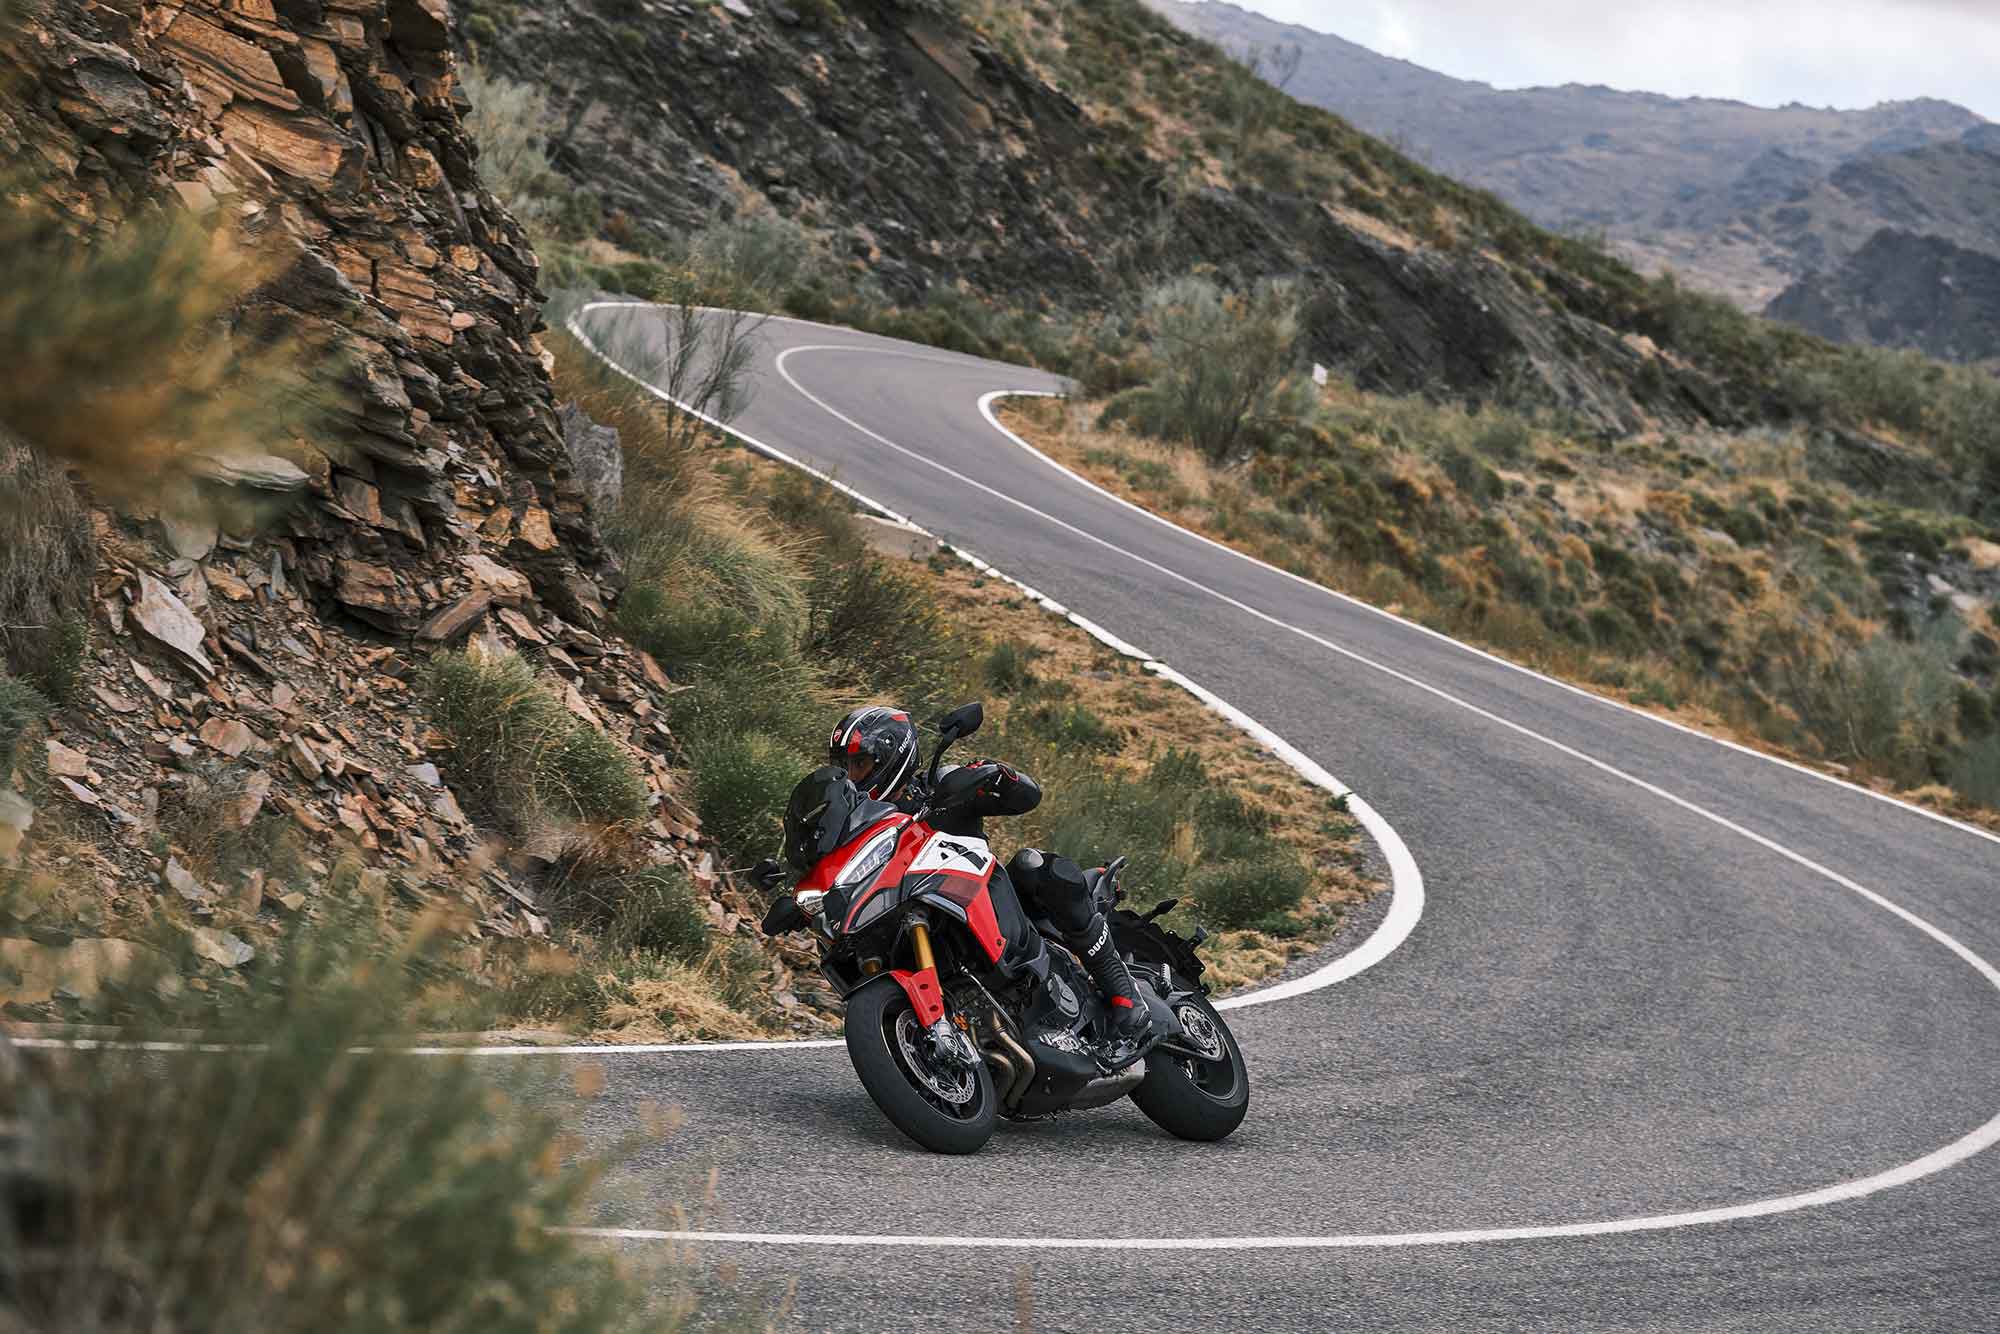 Brembo braking components borrowed from the Panigale ensure you’re ready for any turn.